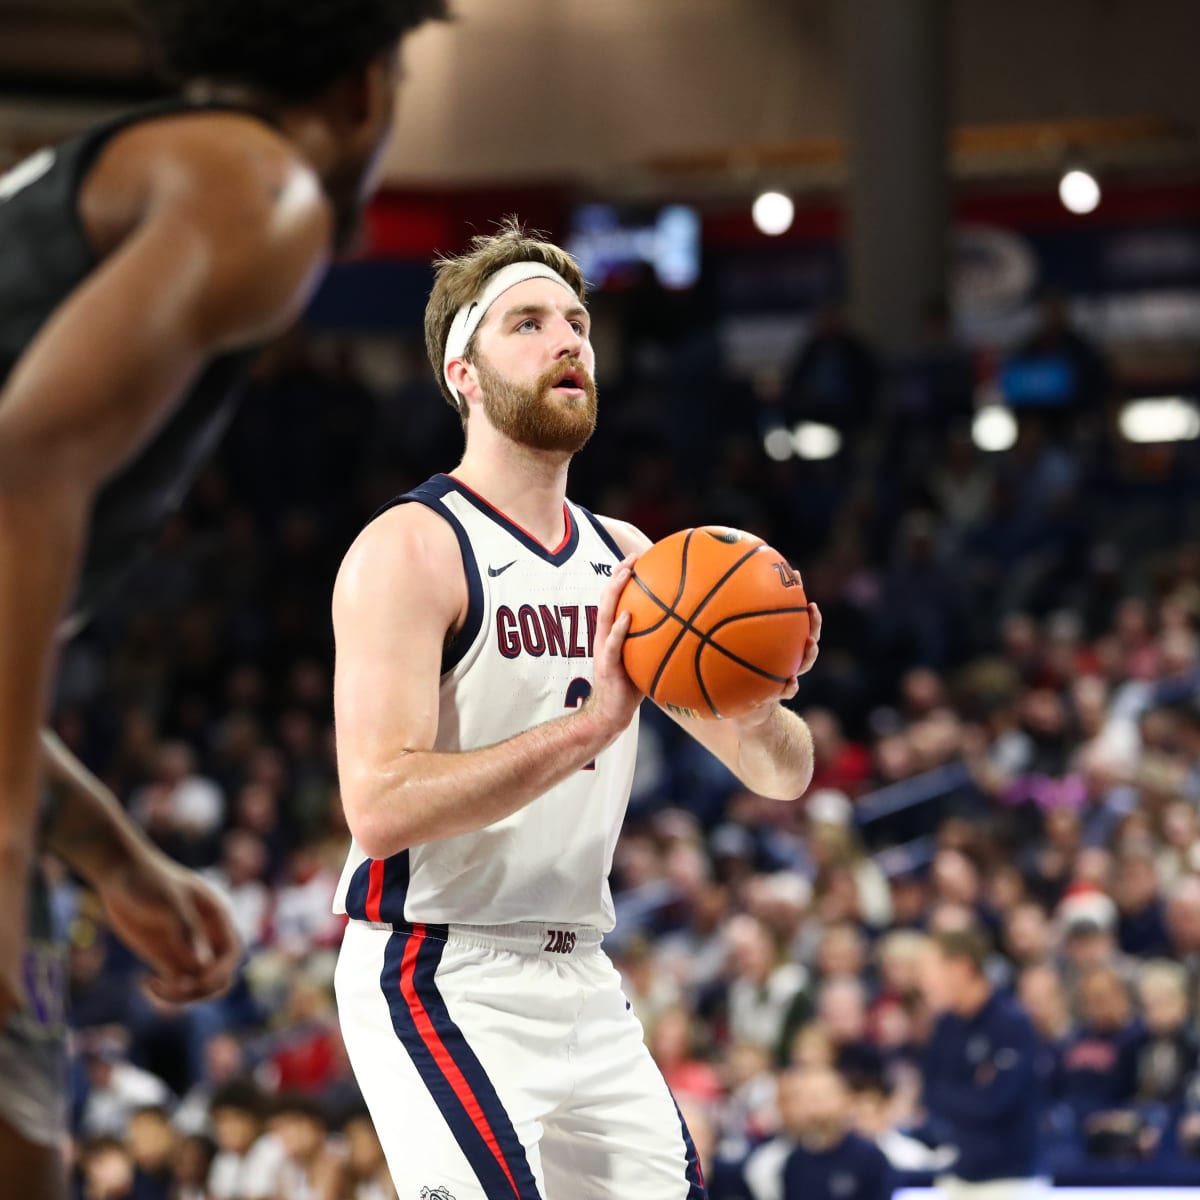 Men's Top 25 college basketball roundup: No. 2 Gonzaga pounds Portland,  eyes first-ever No. 1 ranking